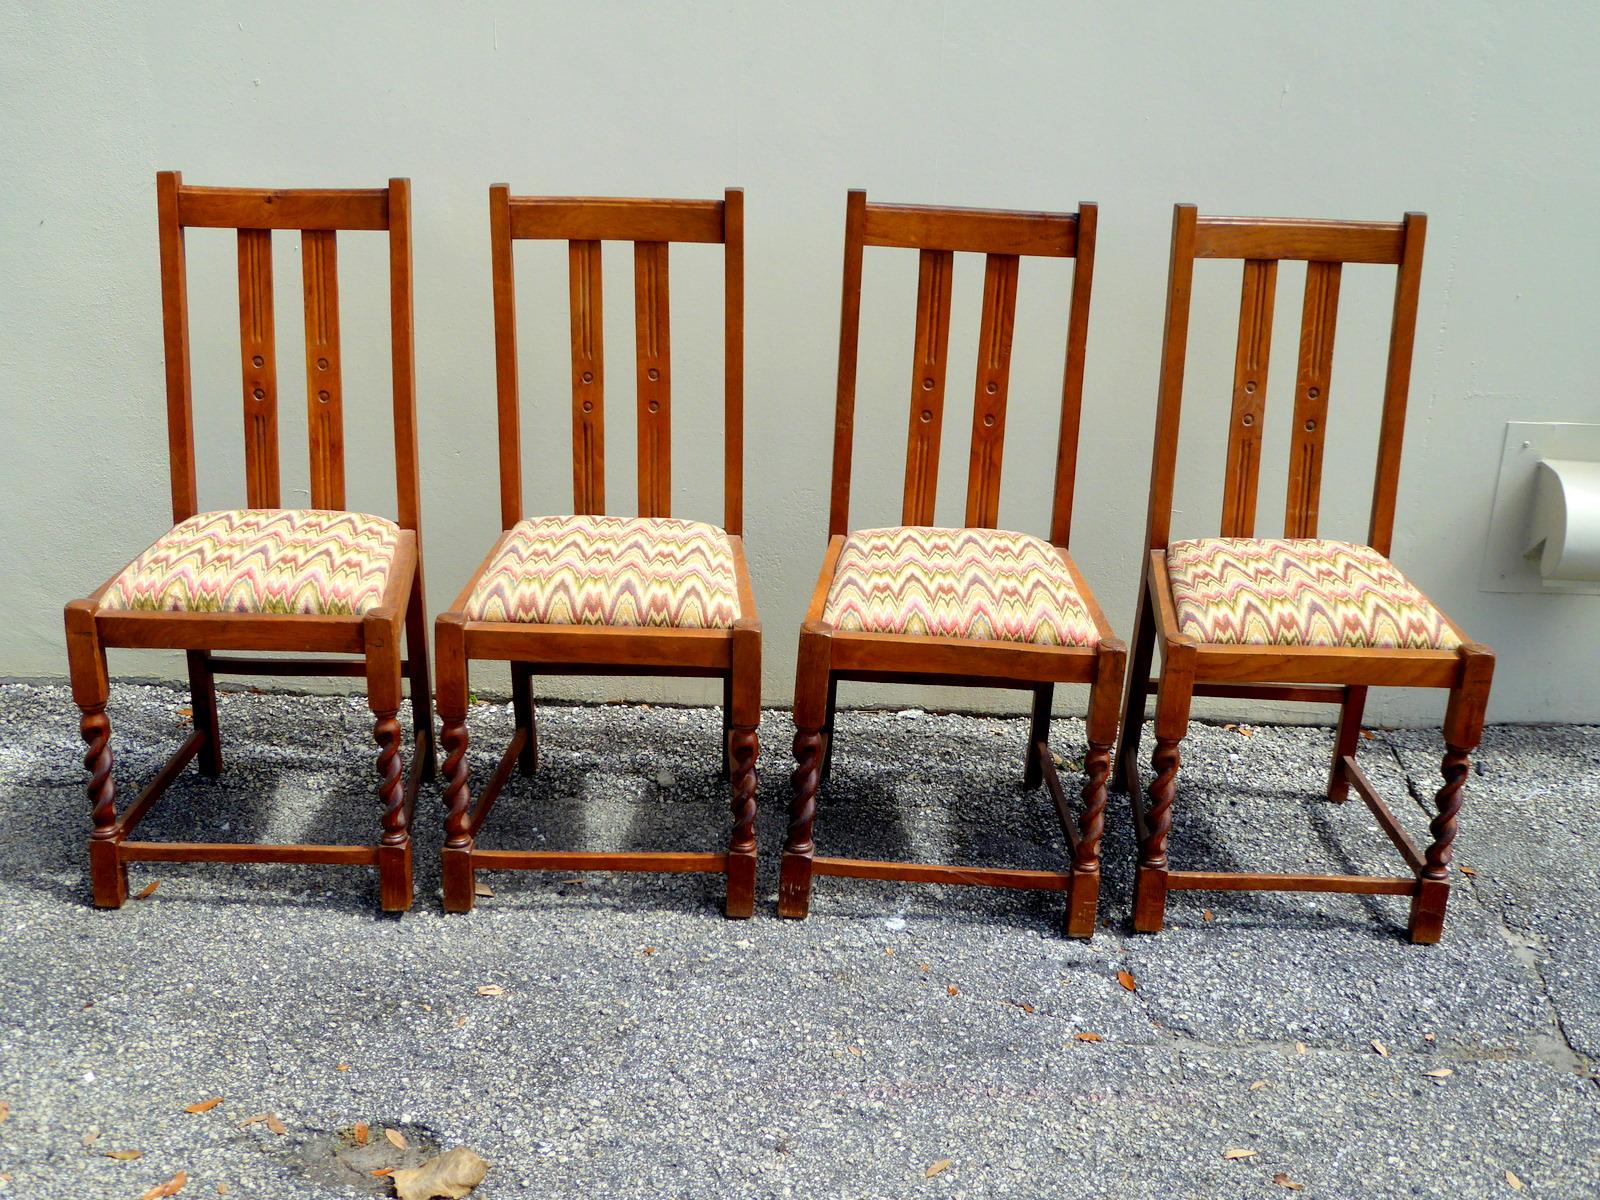 A set of four antique quartersawn oak dining chairs in Mission style with a twist.

A few important notes about all items available through this 1stdibs dealer:

1. We list all our items as being in 